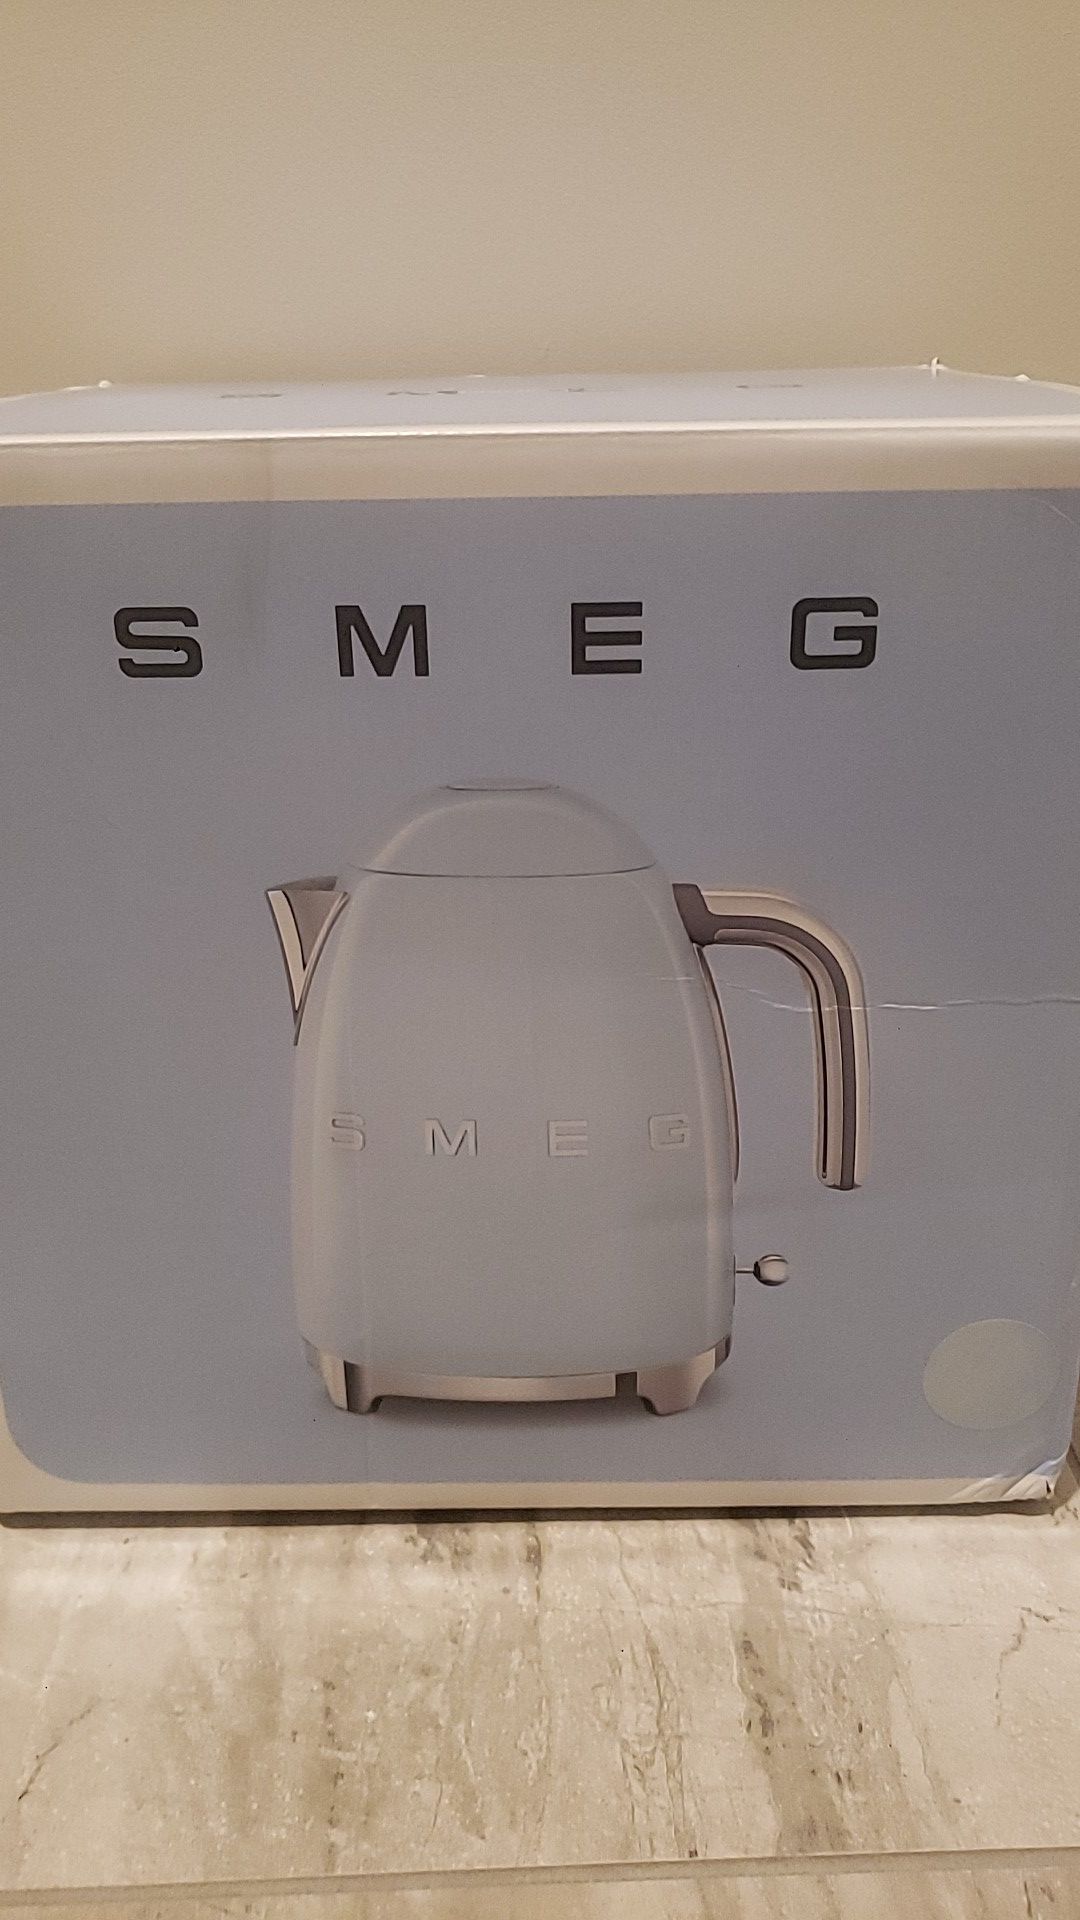 Smeg brang electric tea kettle new unopened in box